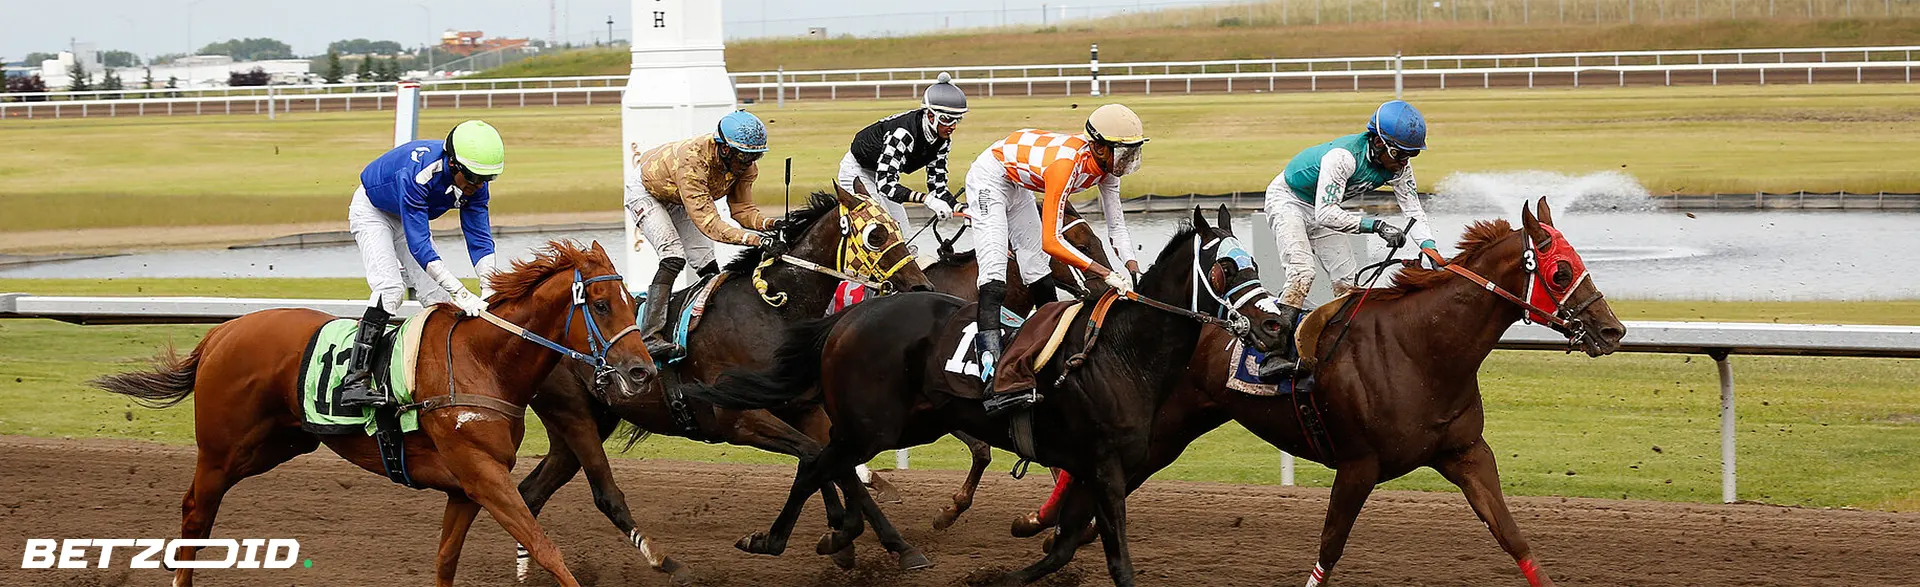 Horse racing event with multiple jockeys and horses in action, representing the competitive and thrilling nature of British Columbia sportsbooks.